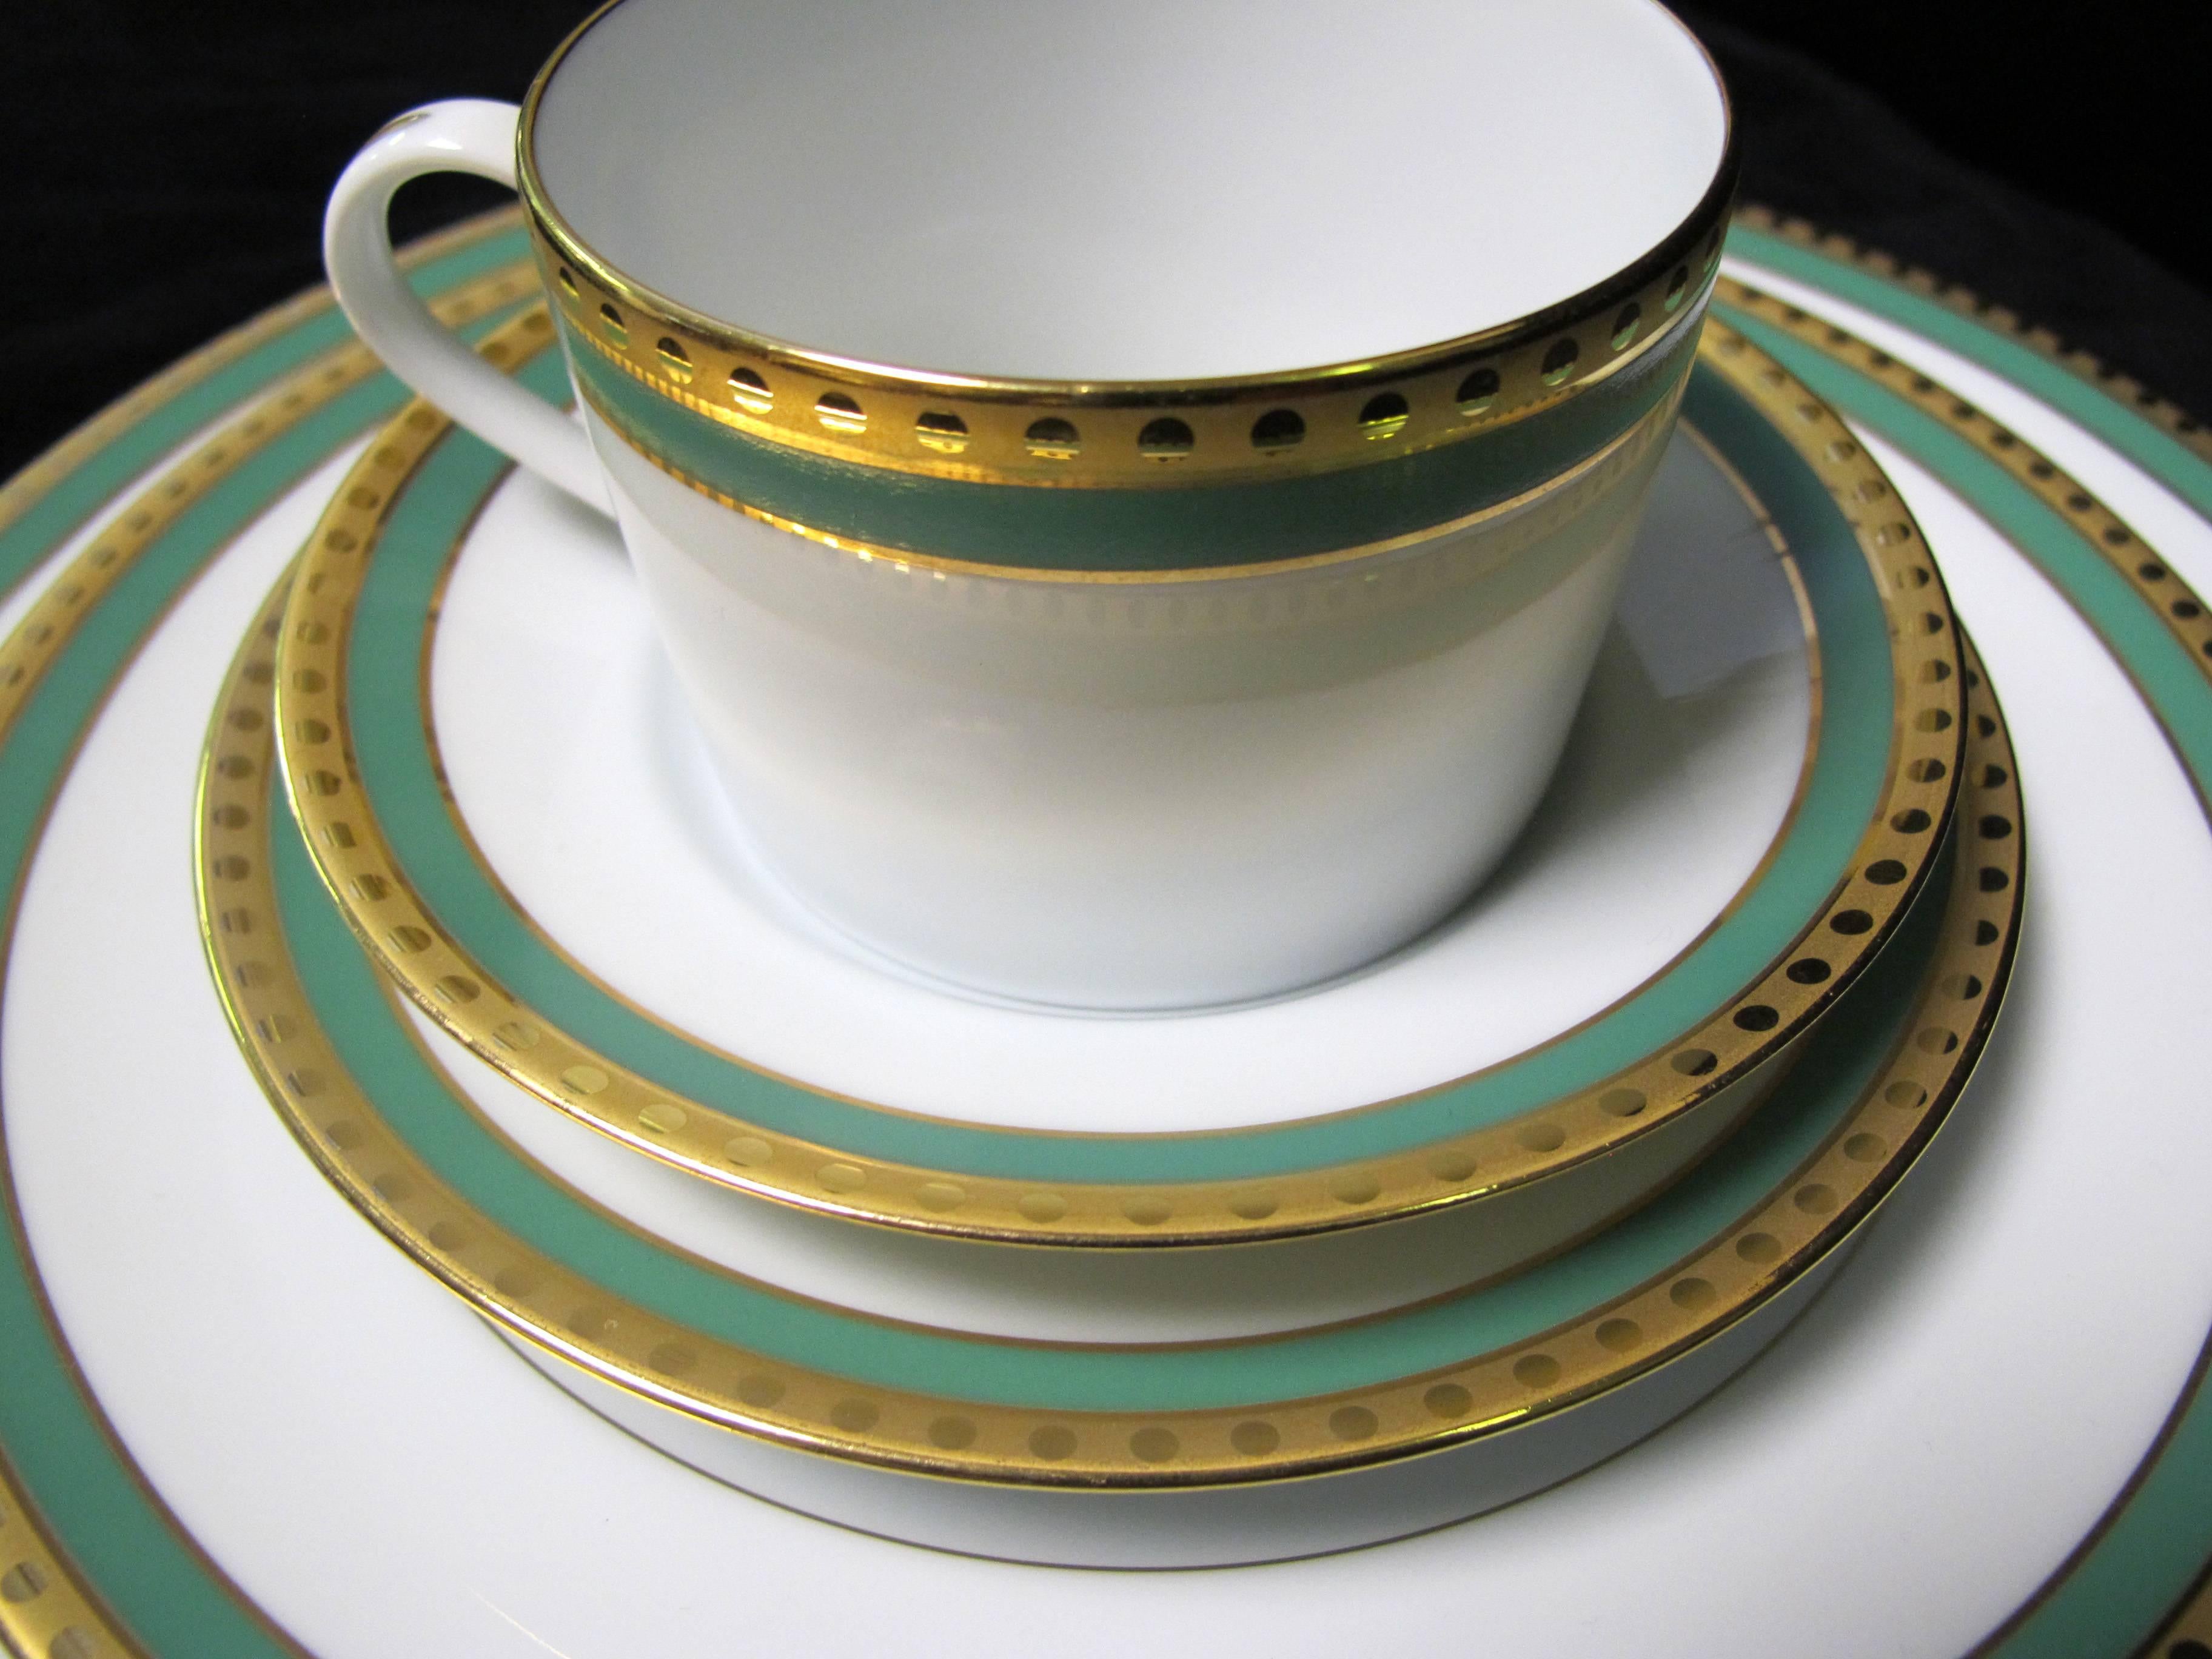 Tiffany & Co. Green Band, Single Place Setting of Five Pieces In Excellent Condition For Sale In Cleveland, OH